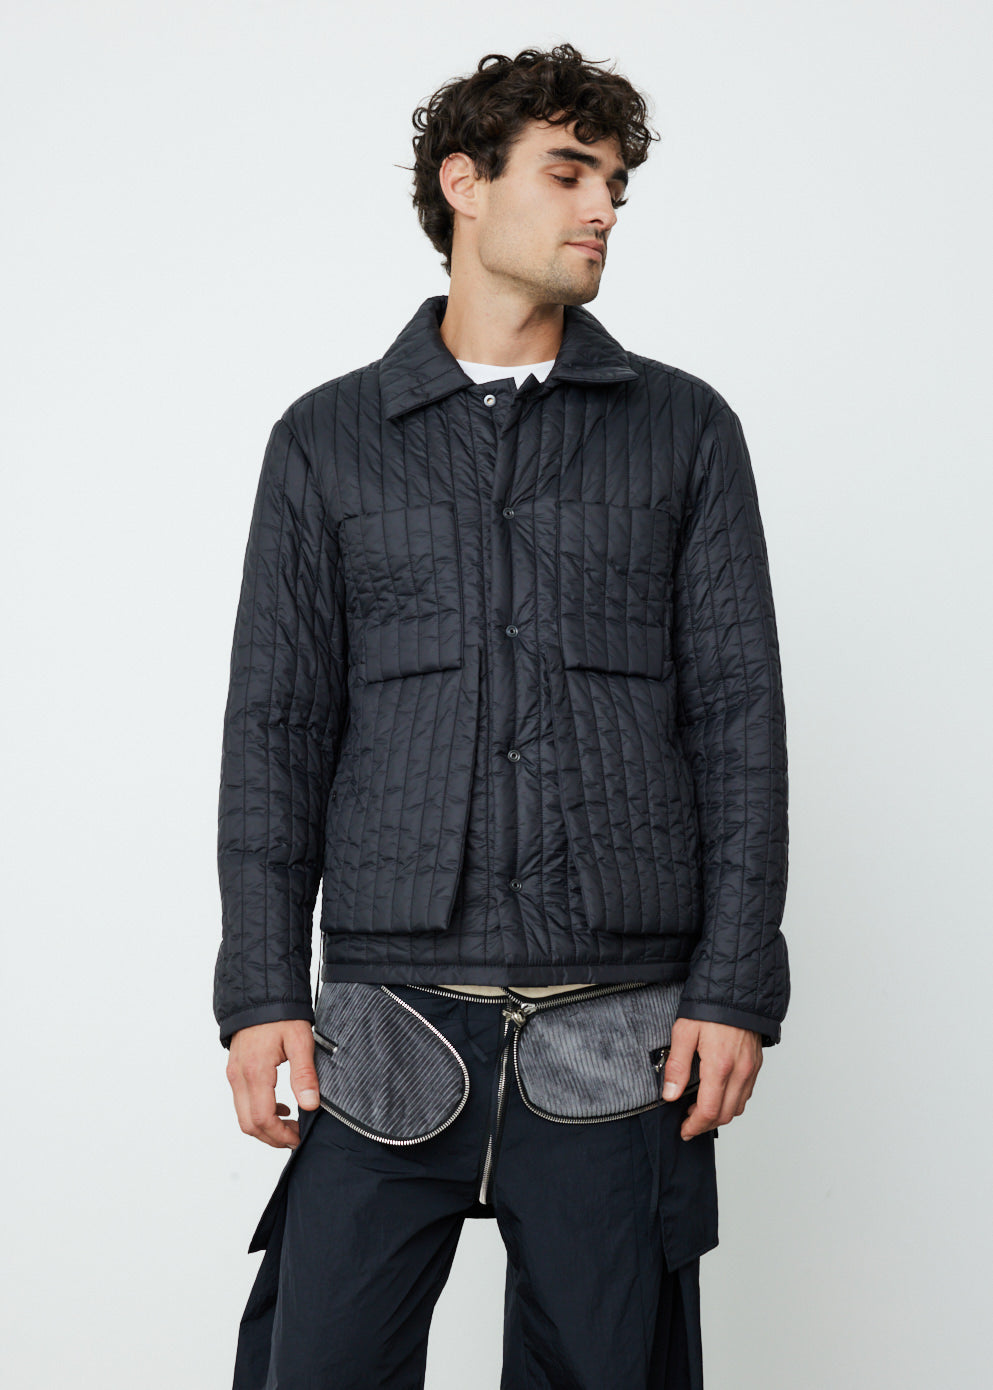 CRAIG GREEN quilted worker jacket